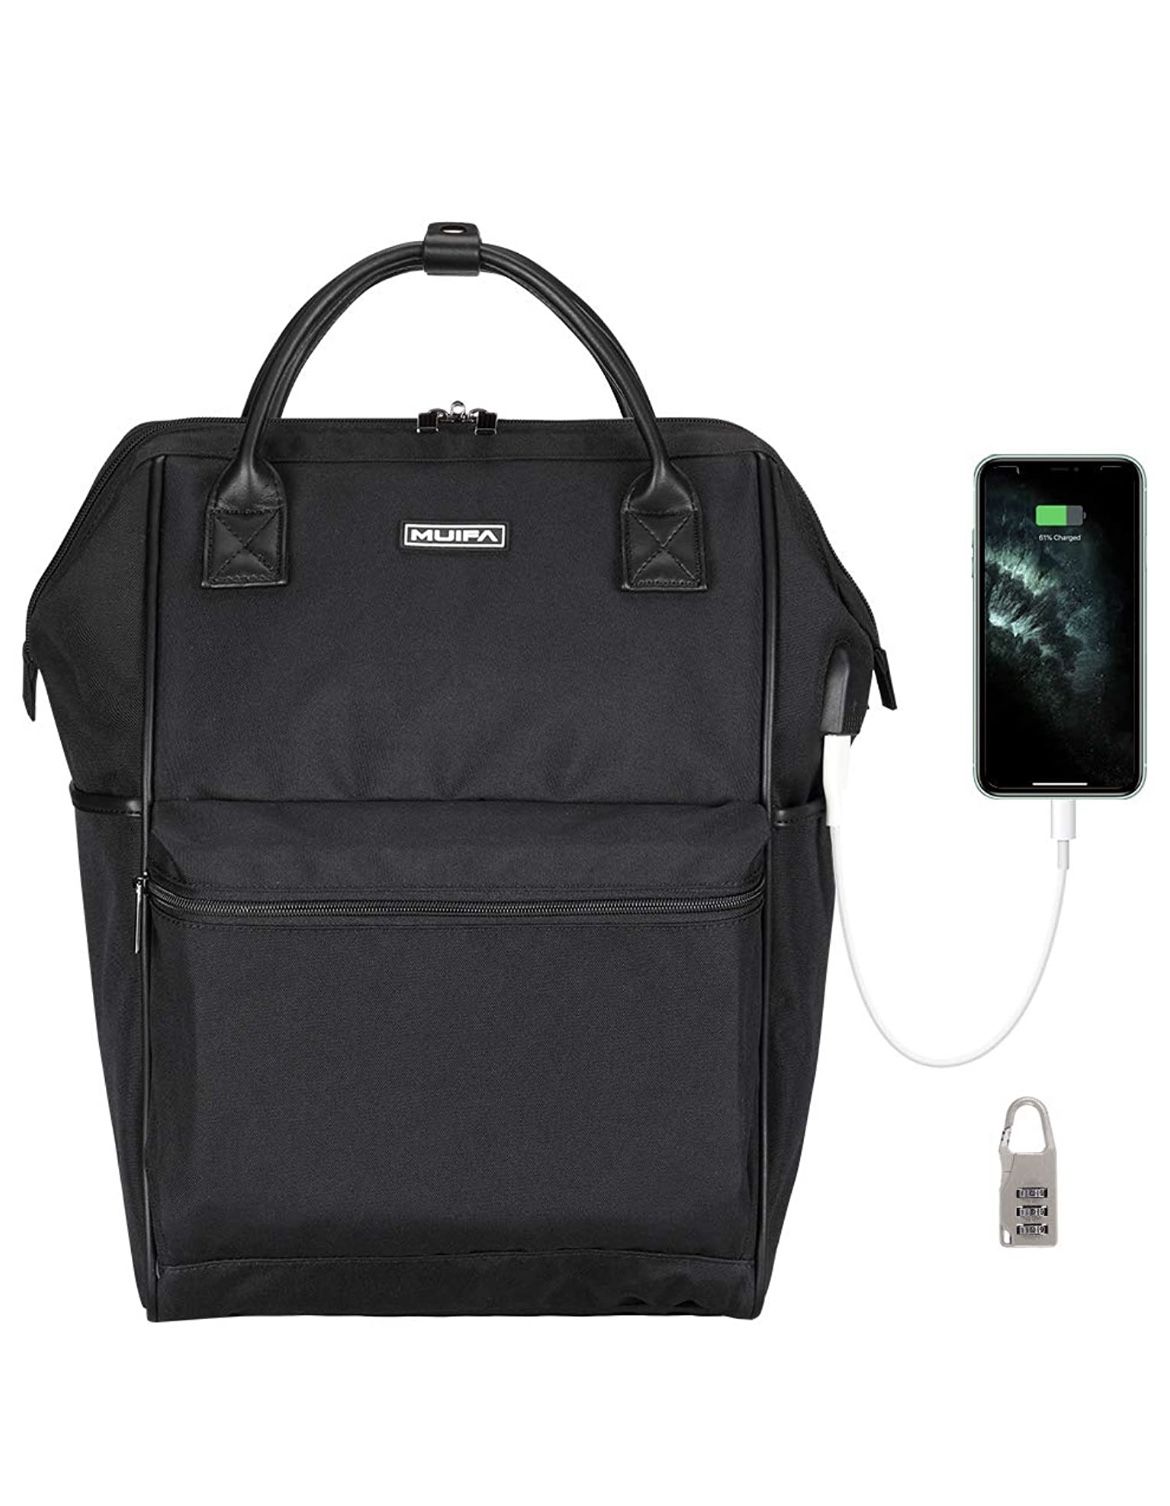 Travel Laptop Backpack with Macbook Laptop iPad Tablets Compartment, Multipurpose School Bag Work Business Back Pack w/USB Charging & Anti-Theft Lock